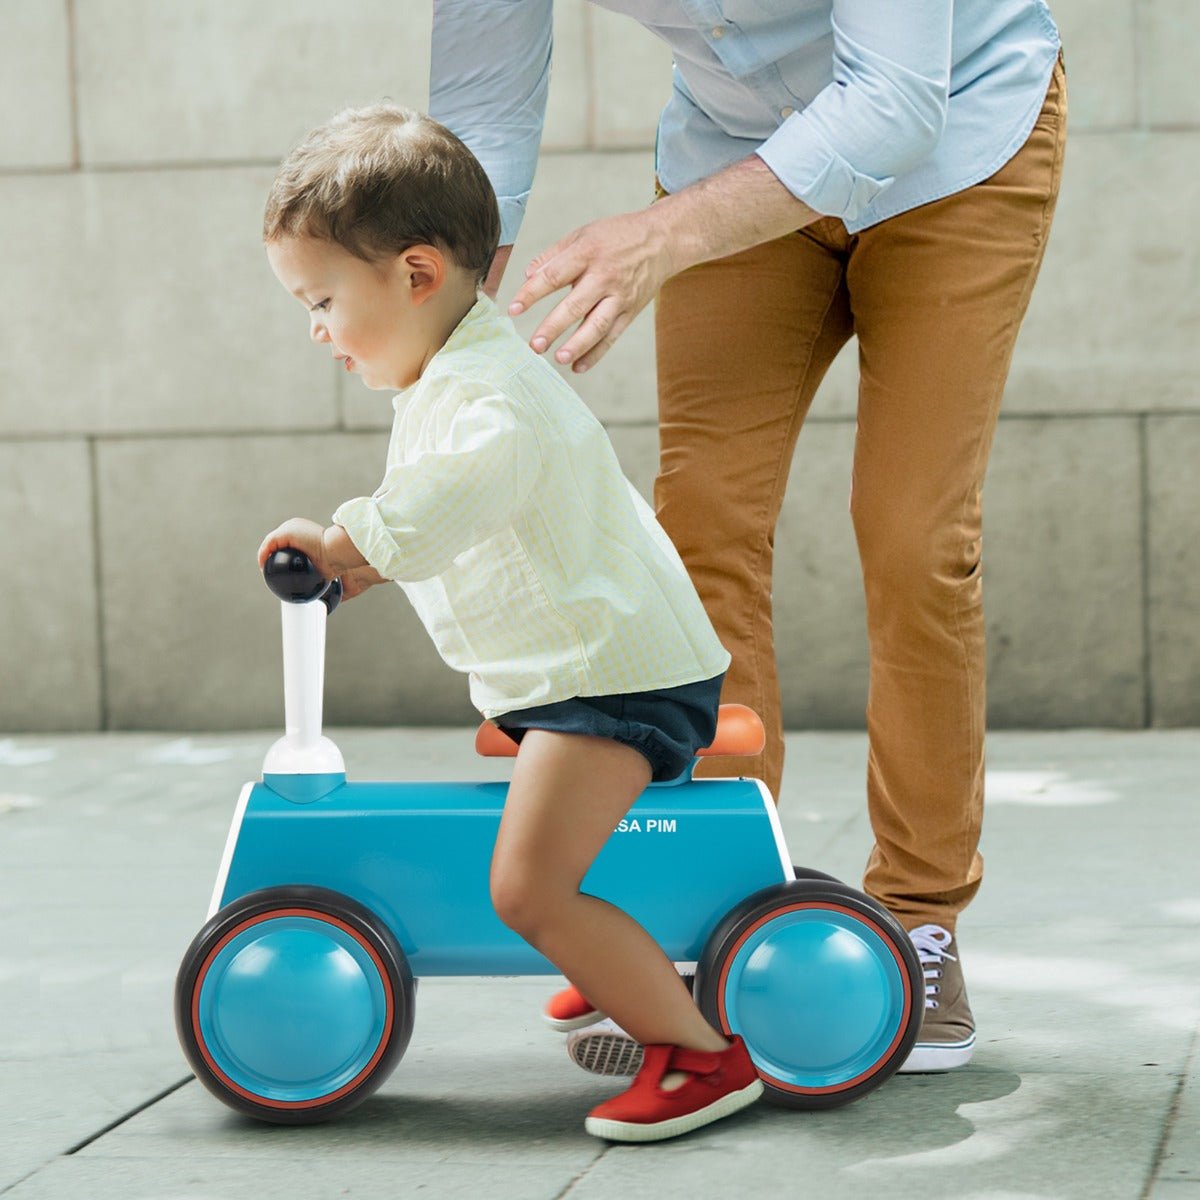 Pedal-Free Baby Balance Bike - Early Mobility for Infants